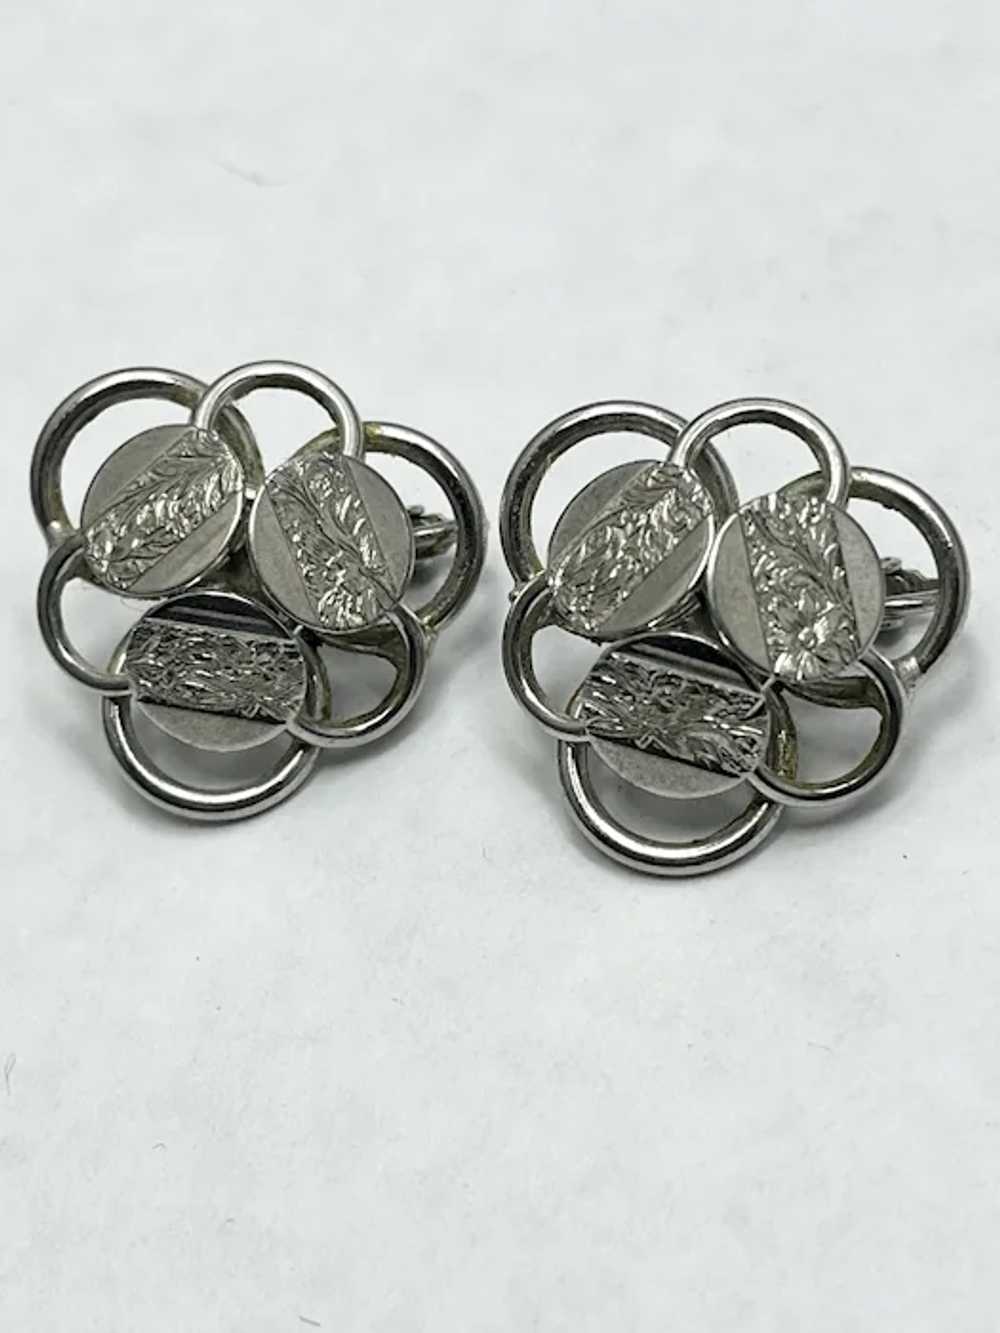 Vintage Sarah Coventry Clip On Earrings - image 2